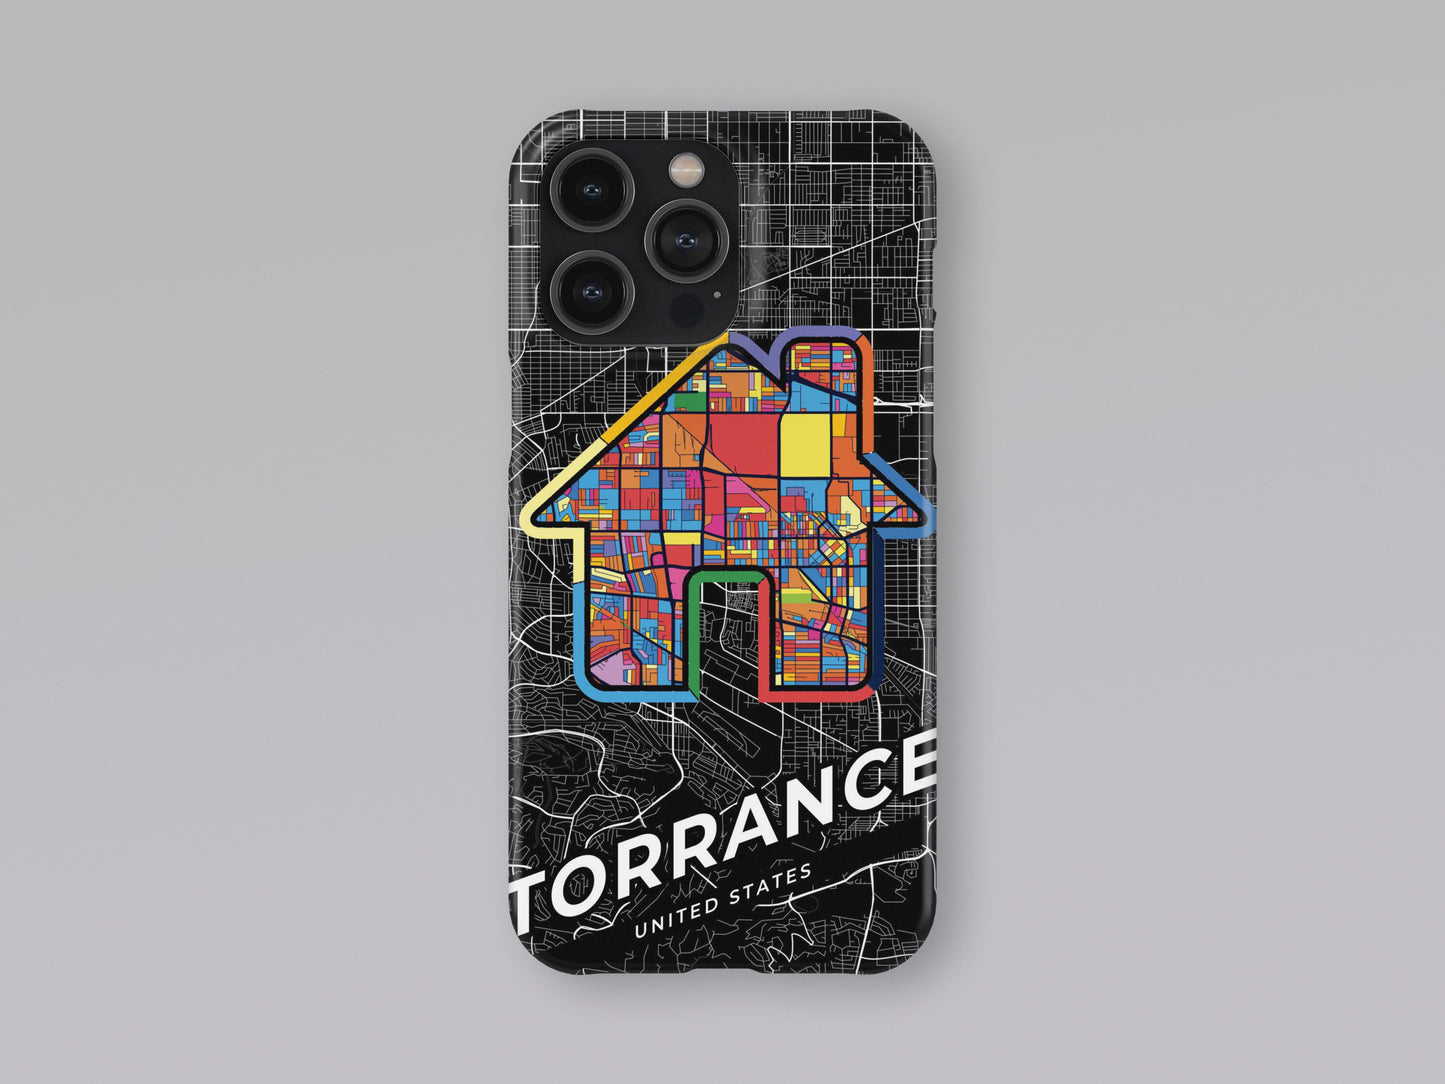 Torrance California slim phone case with colorful icon 3